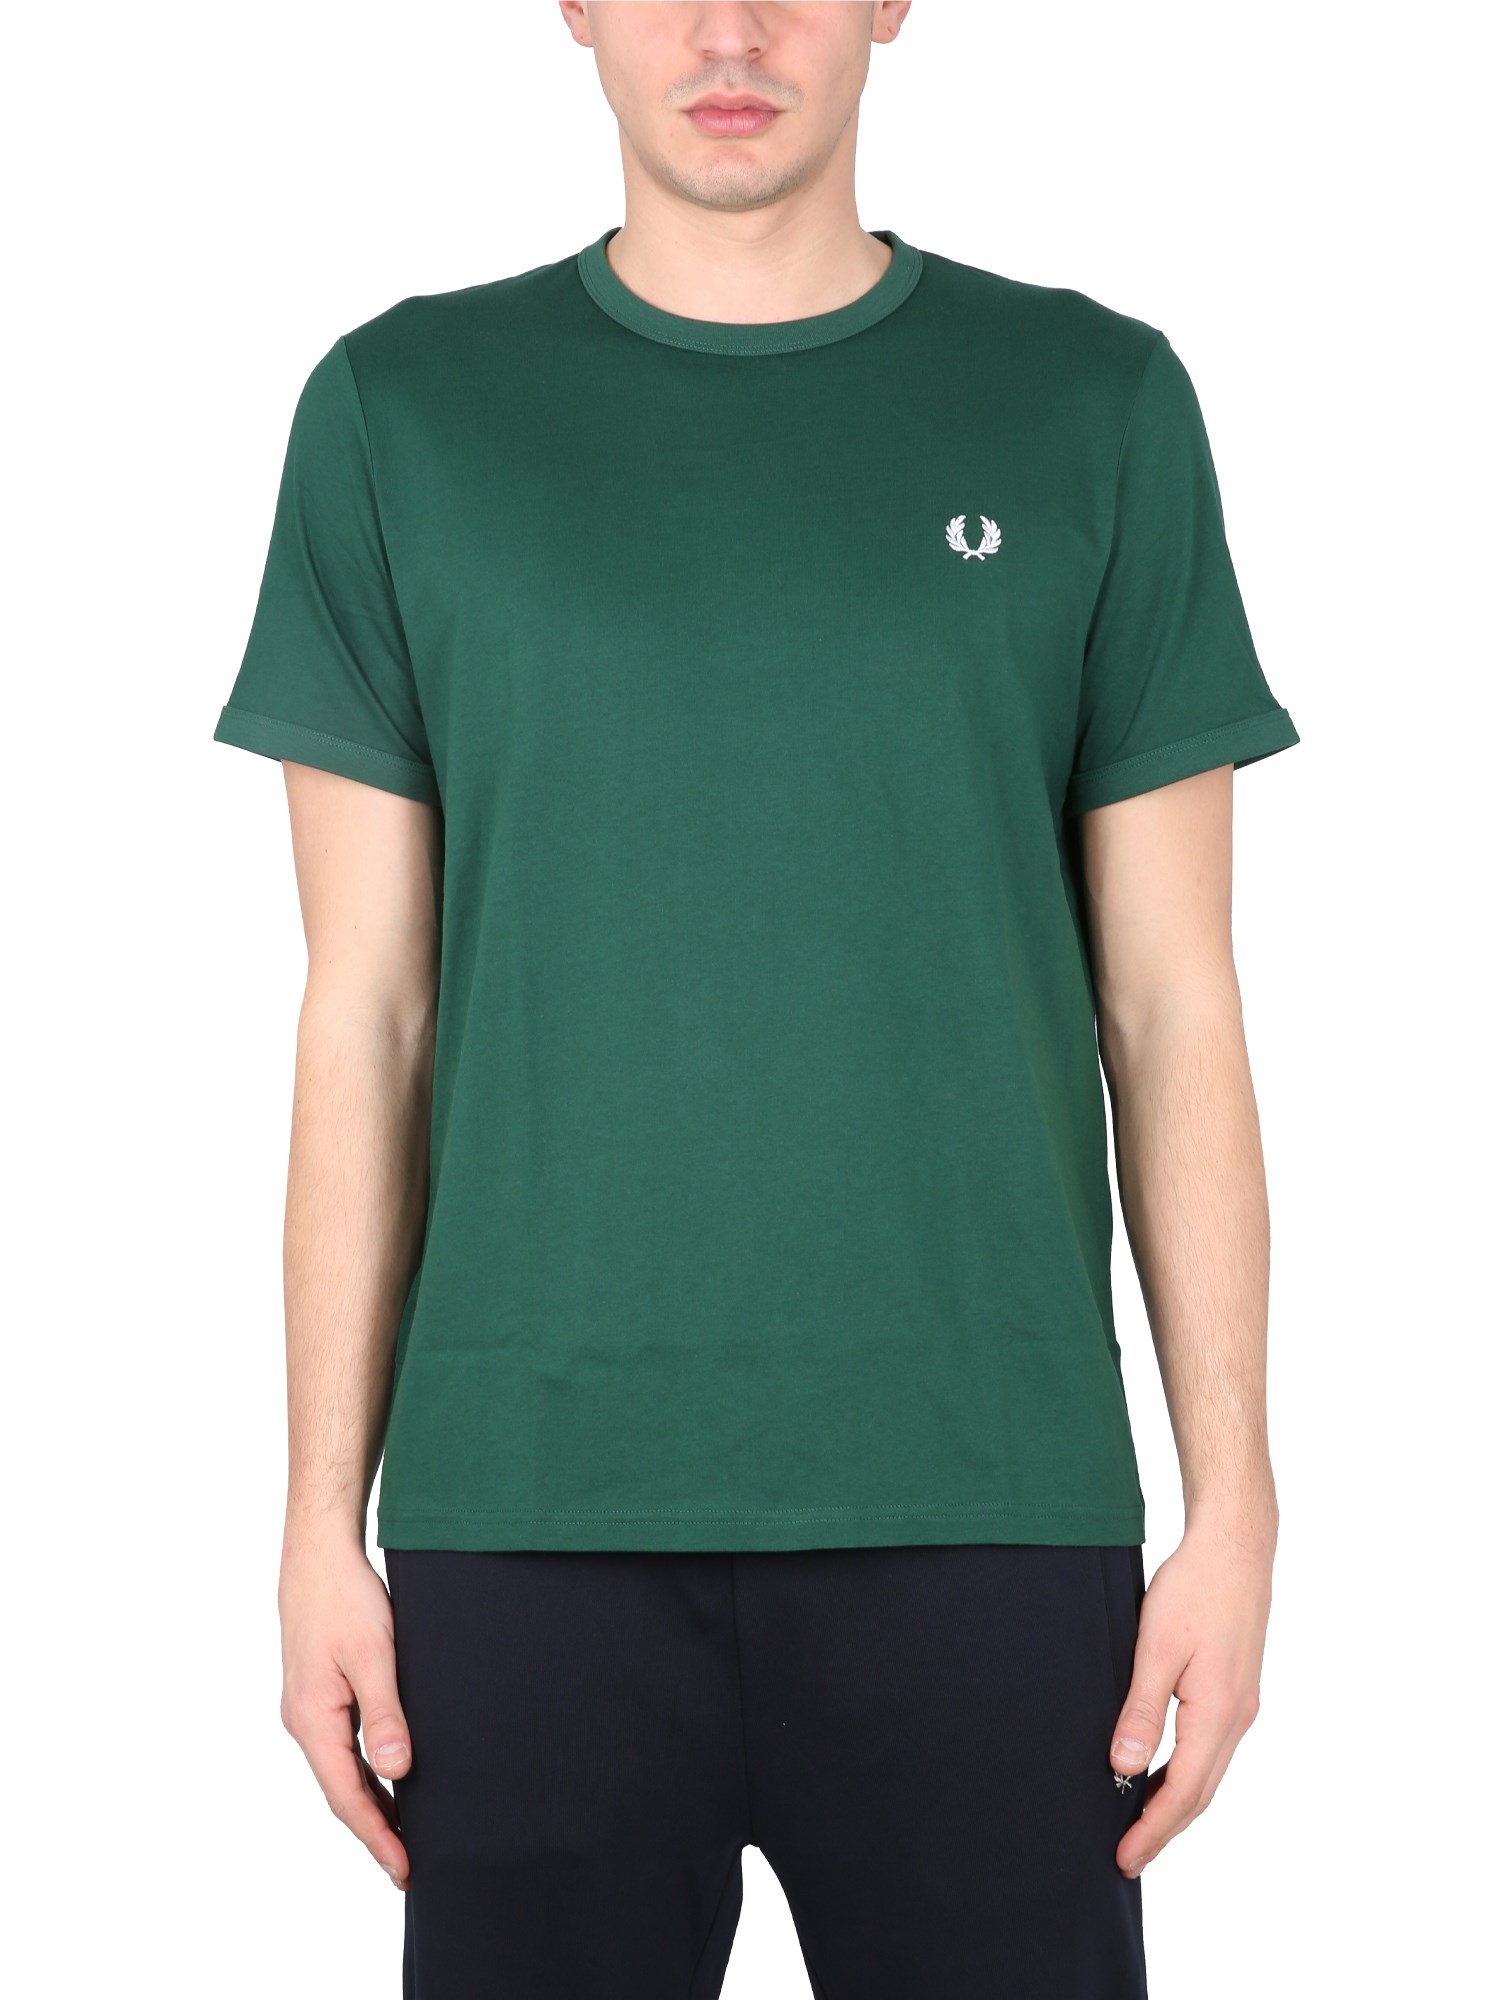 fred perry crewneck t-shirt